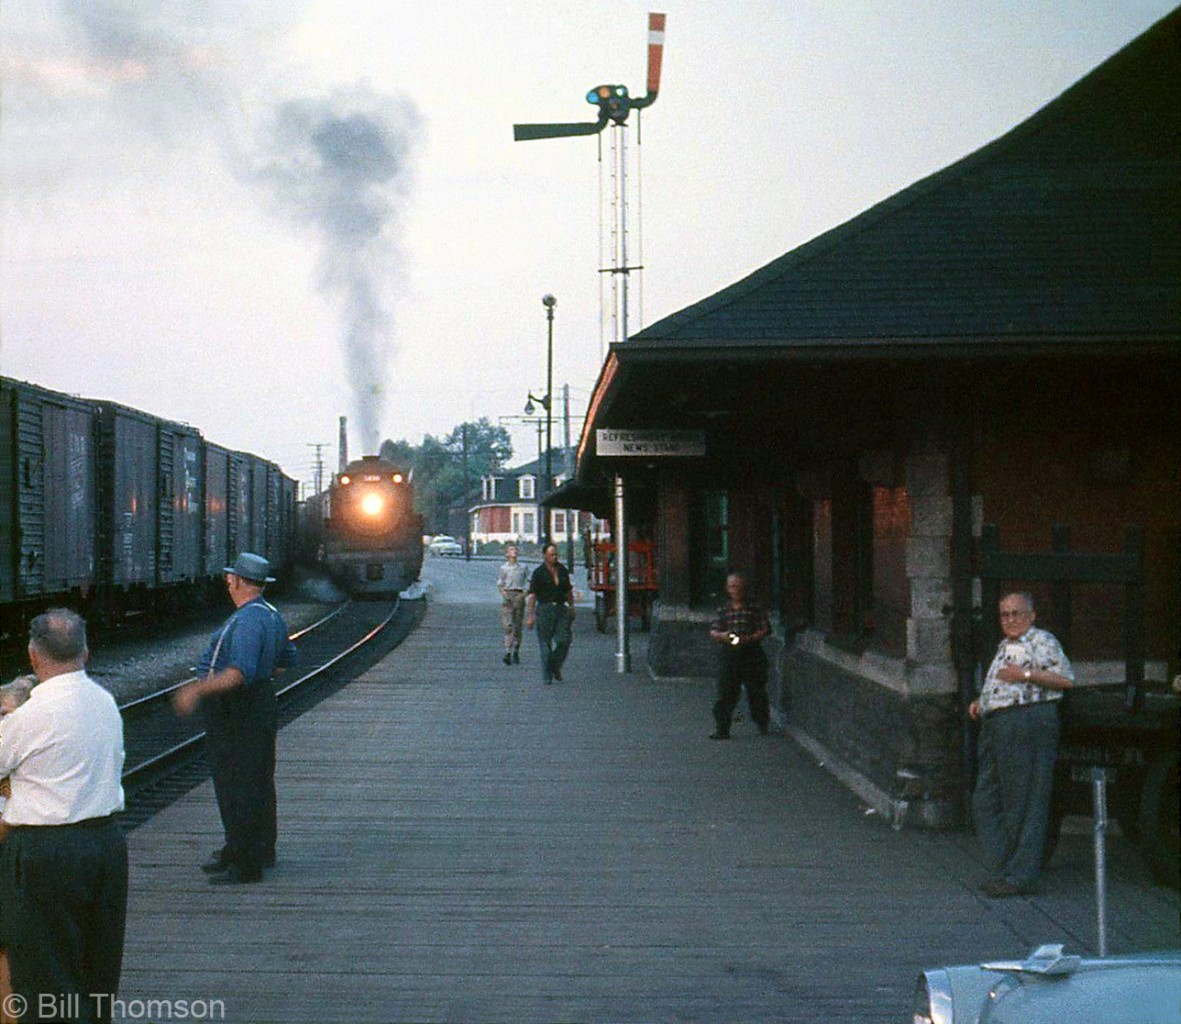 The "Boys down at the Depot" gather to observe an evening meet at Canadian Pacific's Galt Station, with CPR 5419 heading a westbound meeting an eastbound freight in 1959.